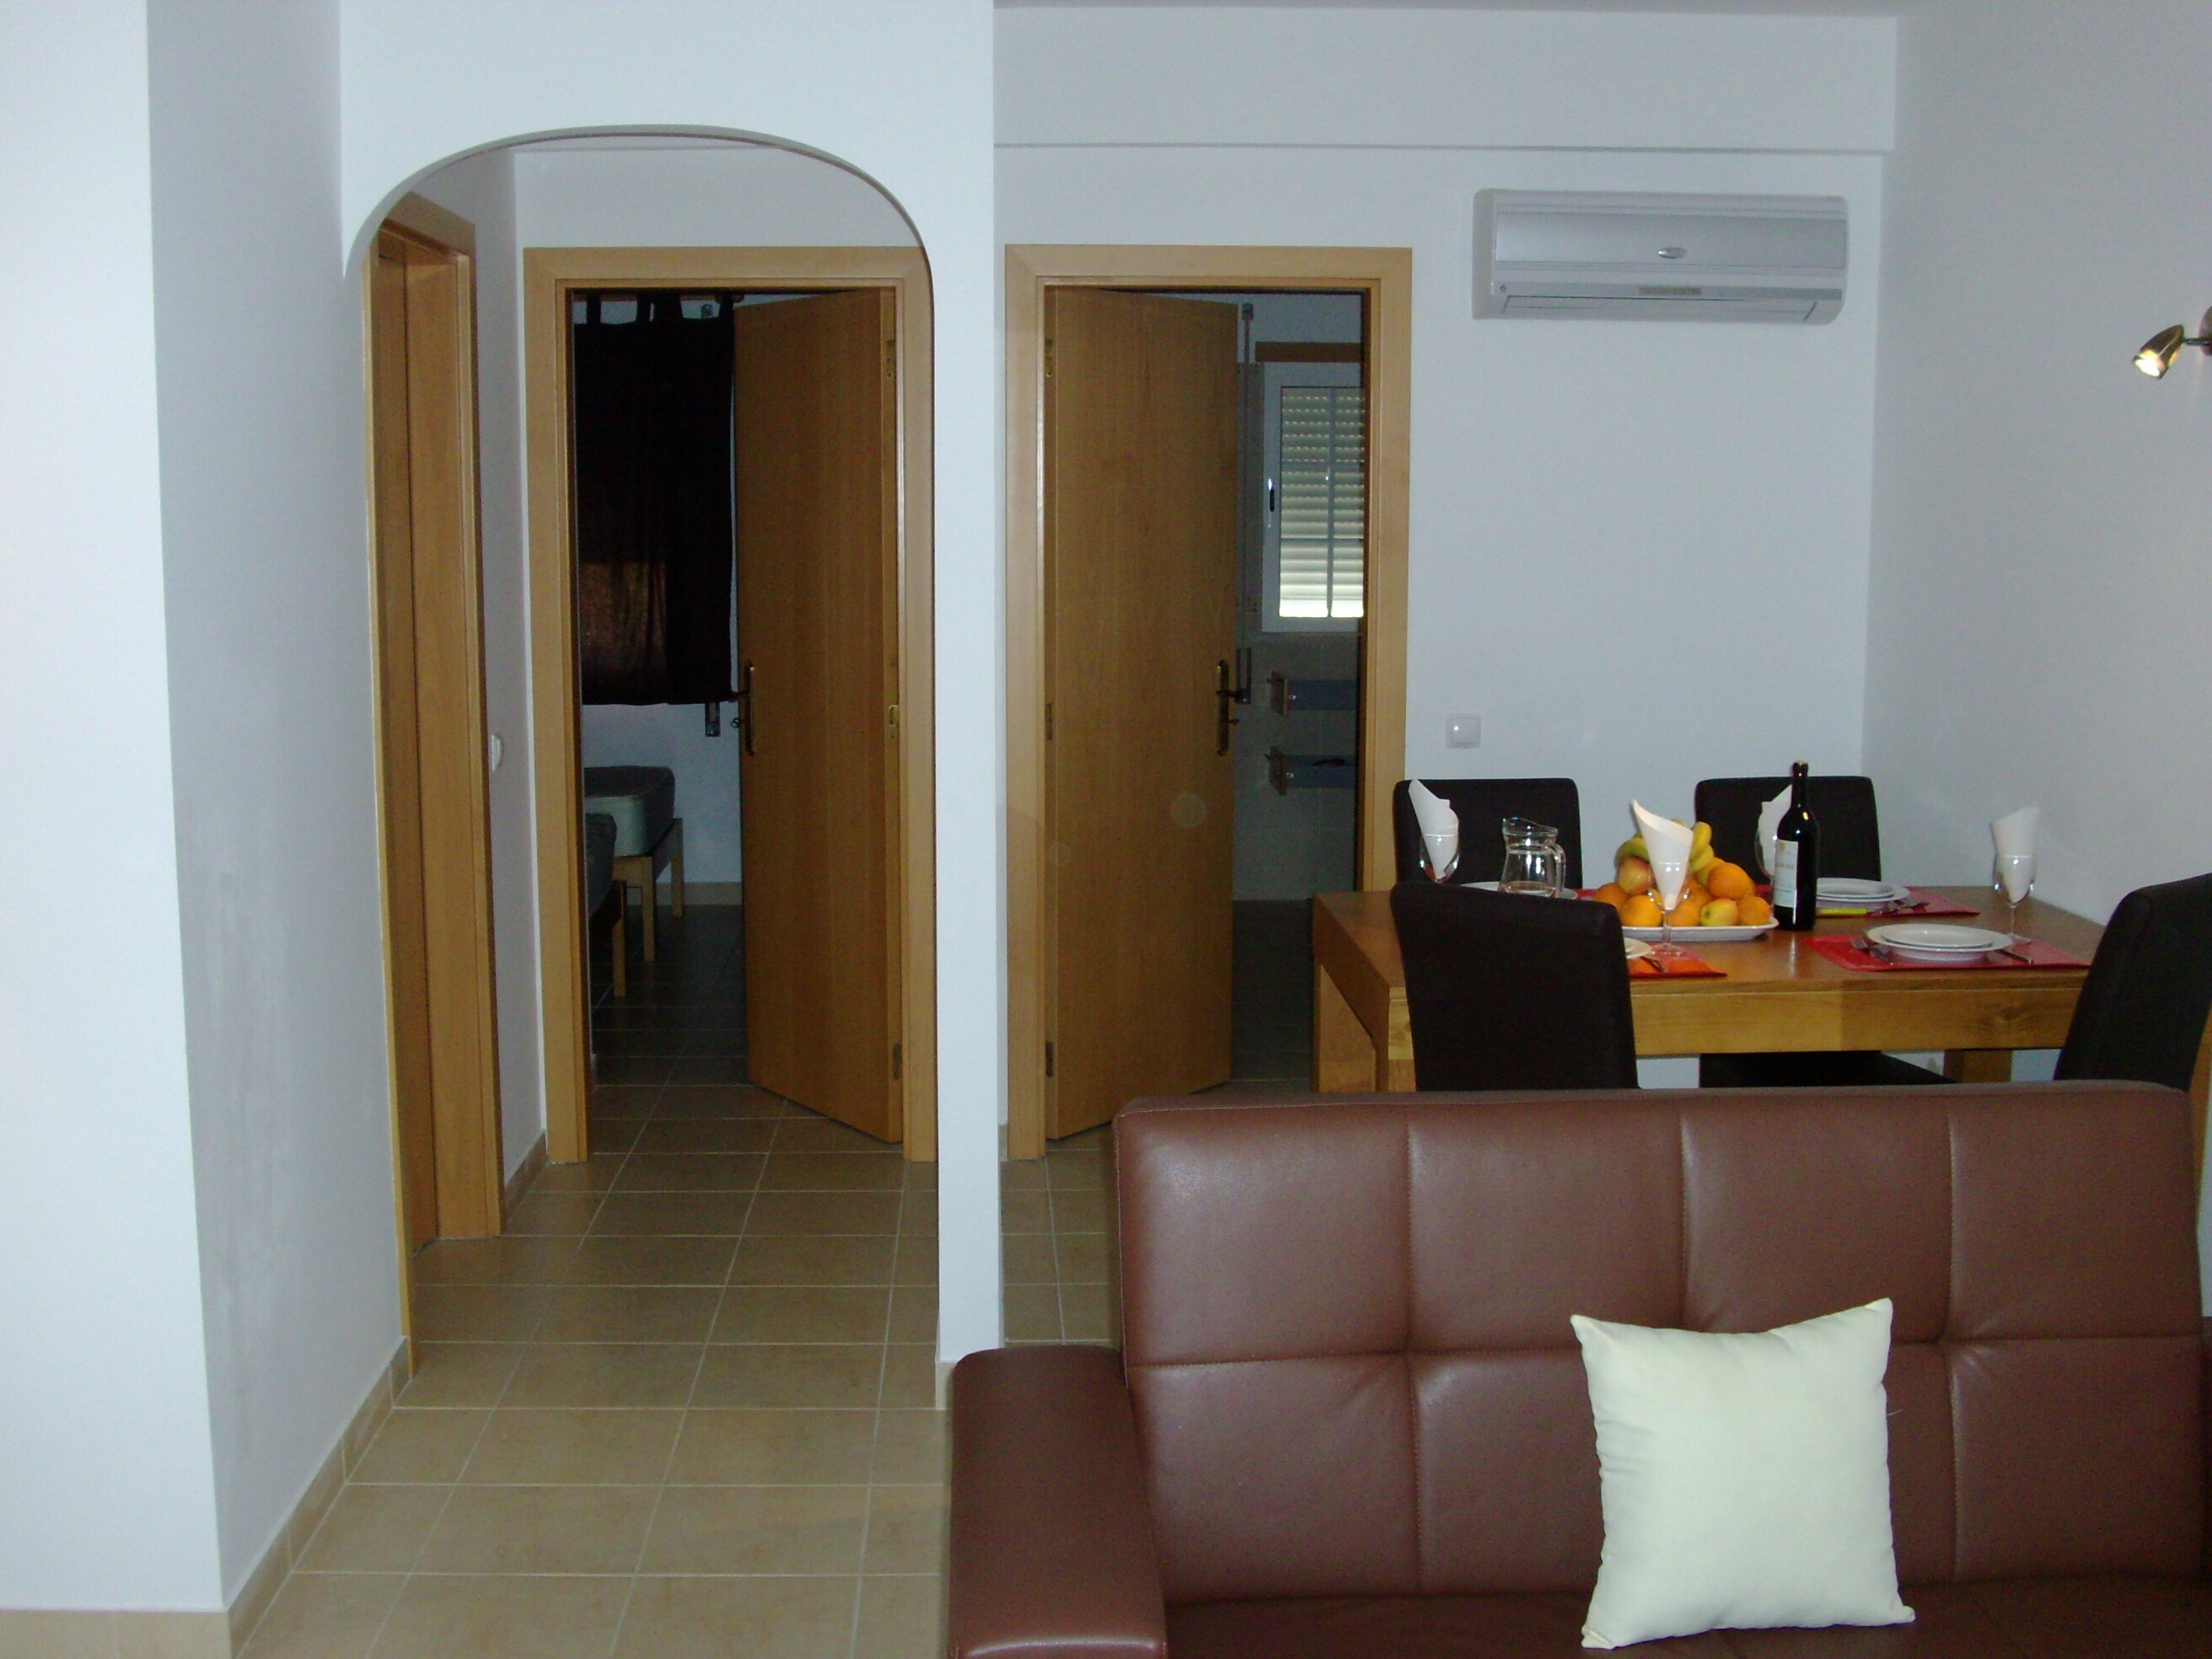 Albufeira 1 bedroom apartment 5 min. from Falesia beach and close to center! J